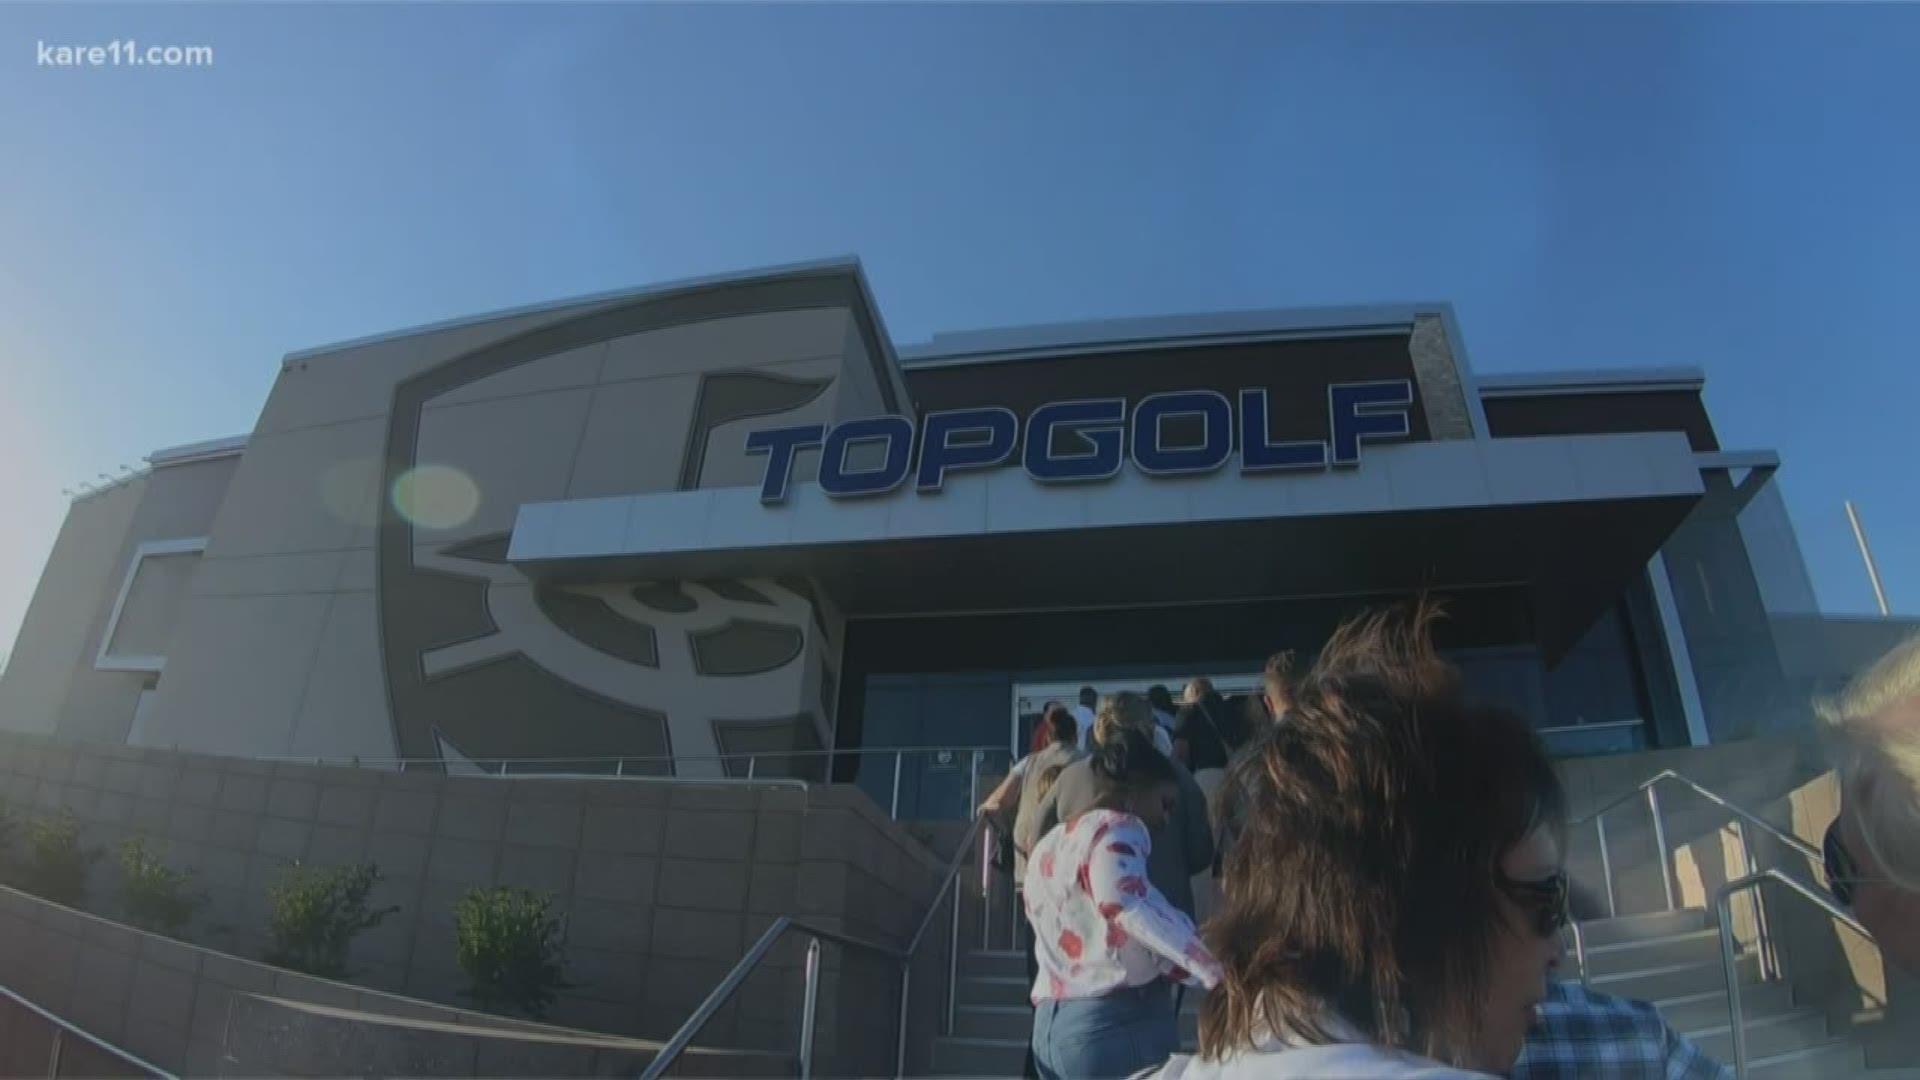 Topgolf -- the 65,000-square-foot entertainment venue in Brooklyn Center -- is opening soon to offer golfers and non-golfers alike to test their skills in an open-air setting.